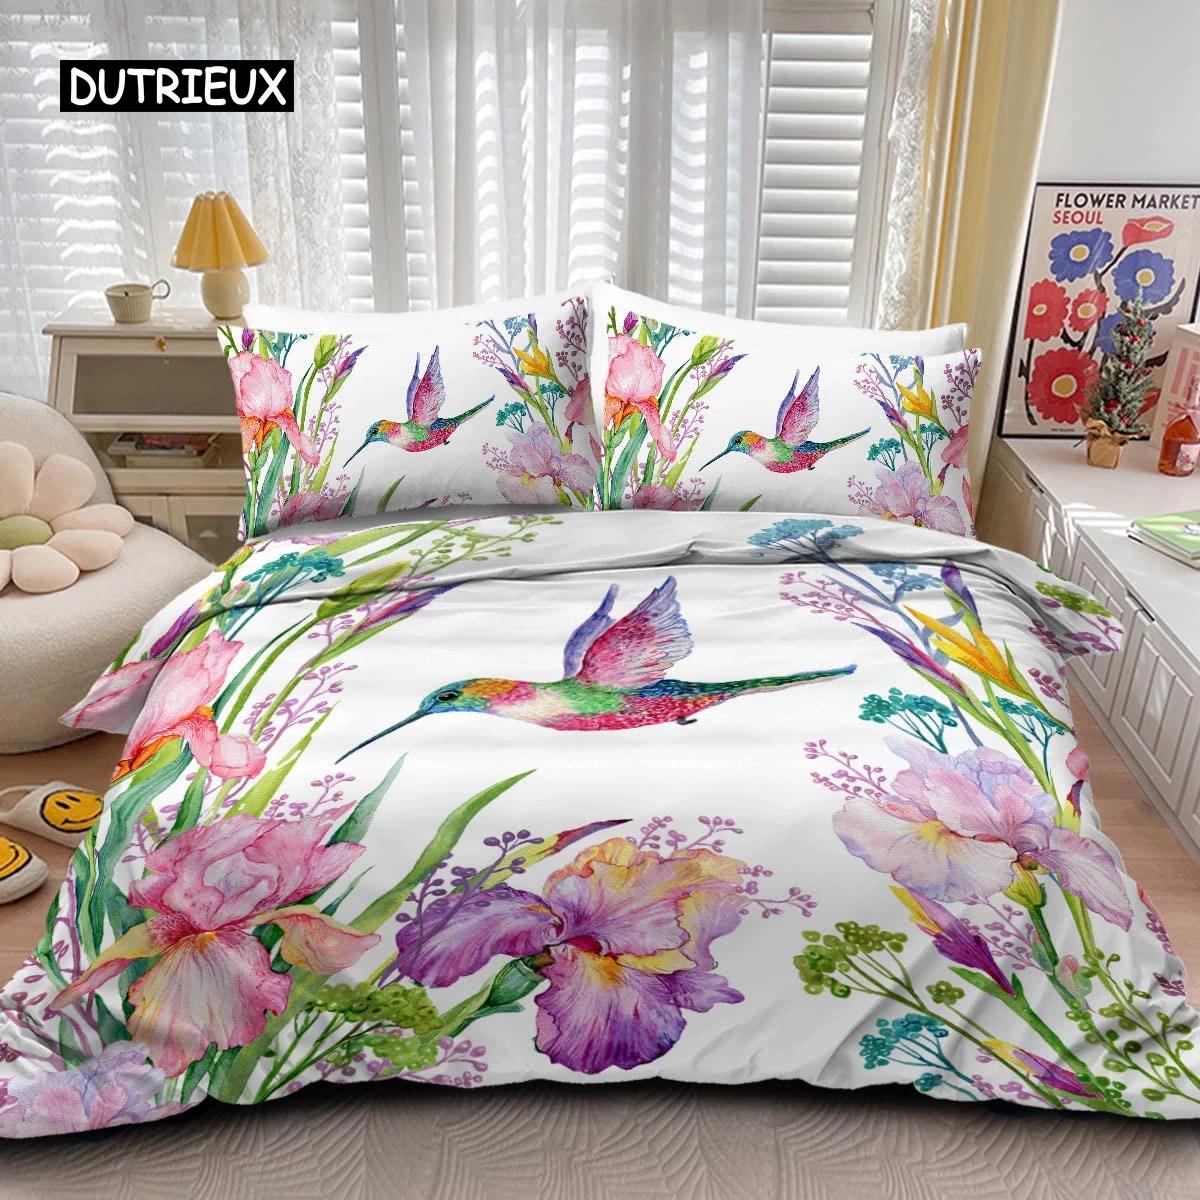 

Tropical Birds Duvet Cover Watercolor Hummingbird Flowers Twin Bedclothes Exotic Wildlife White Abstract Polyester Qulit Cover